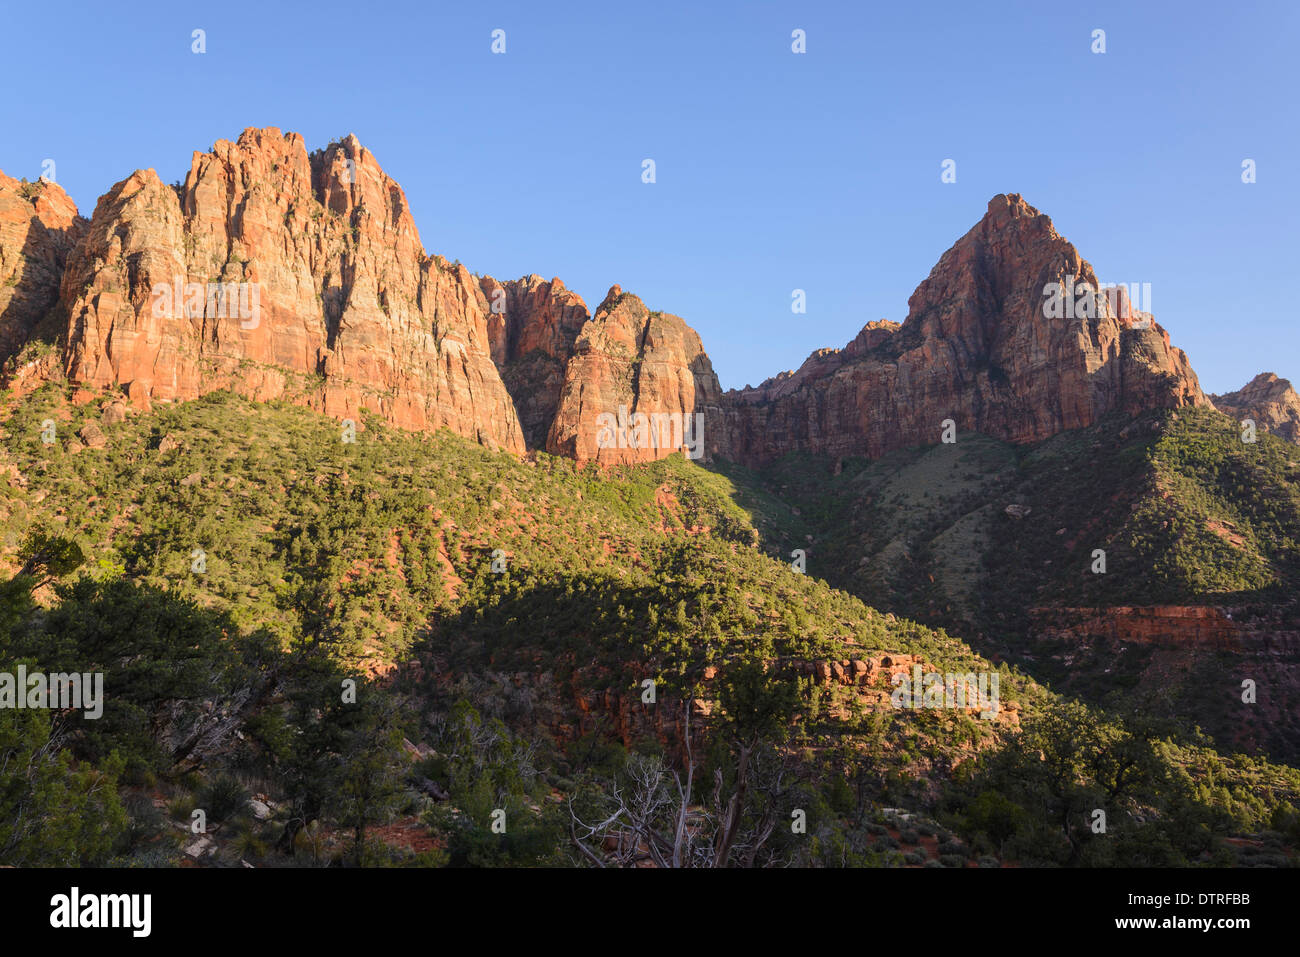 Sunset, from the Watchman trail, Zion National Park, Utah, USA Stock Photo